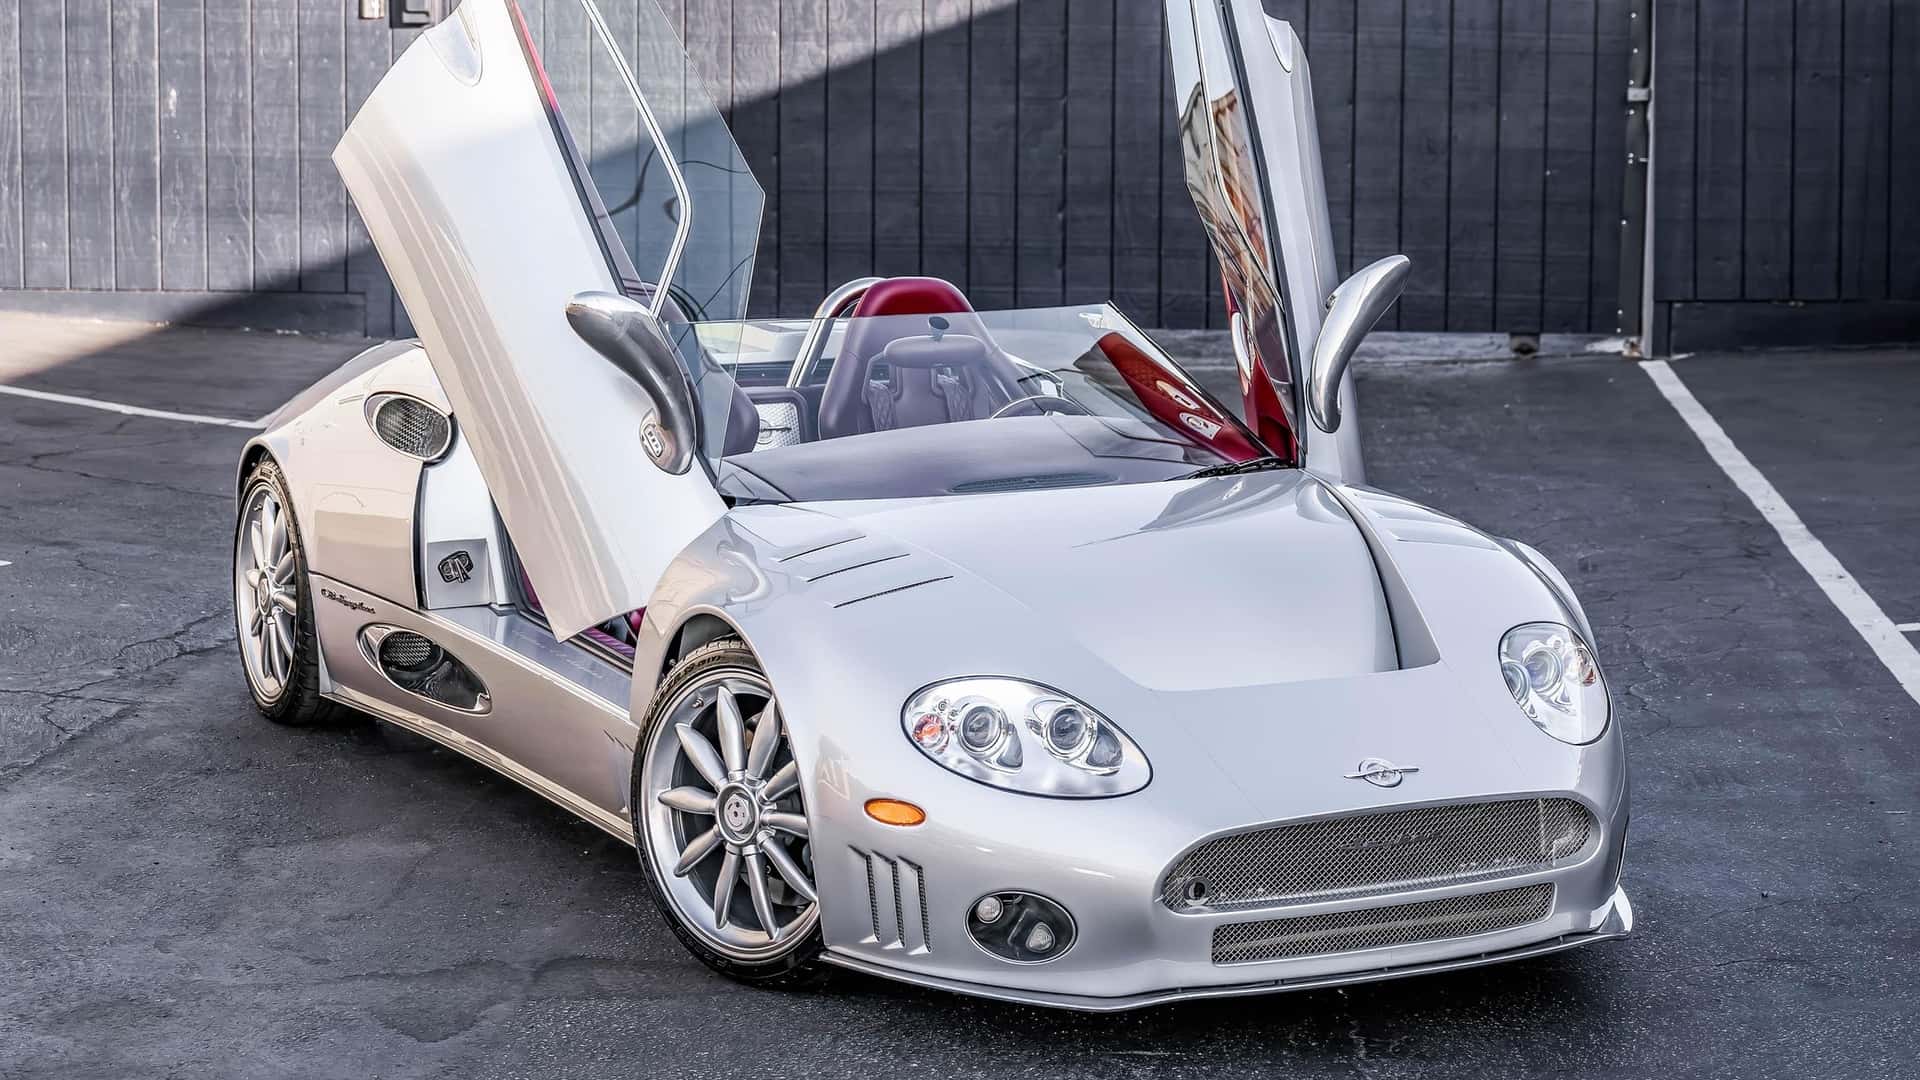 the spyker c8 is the coolest car for the money, period